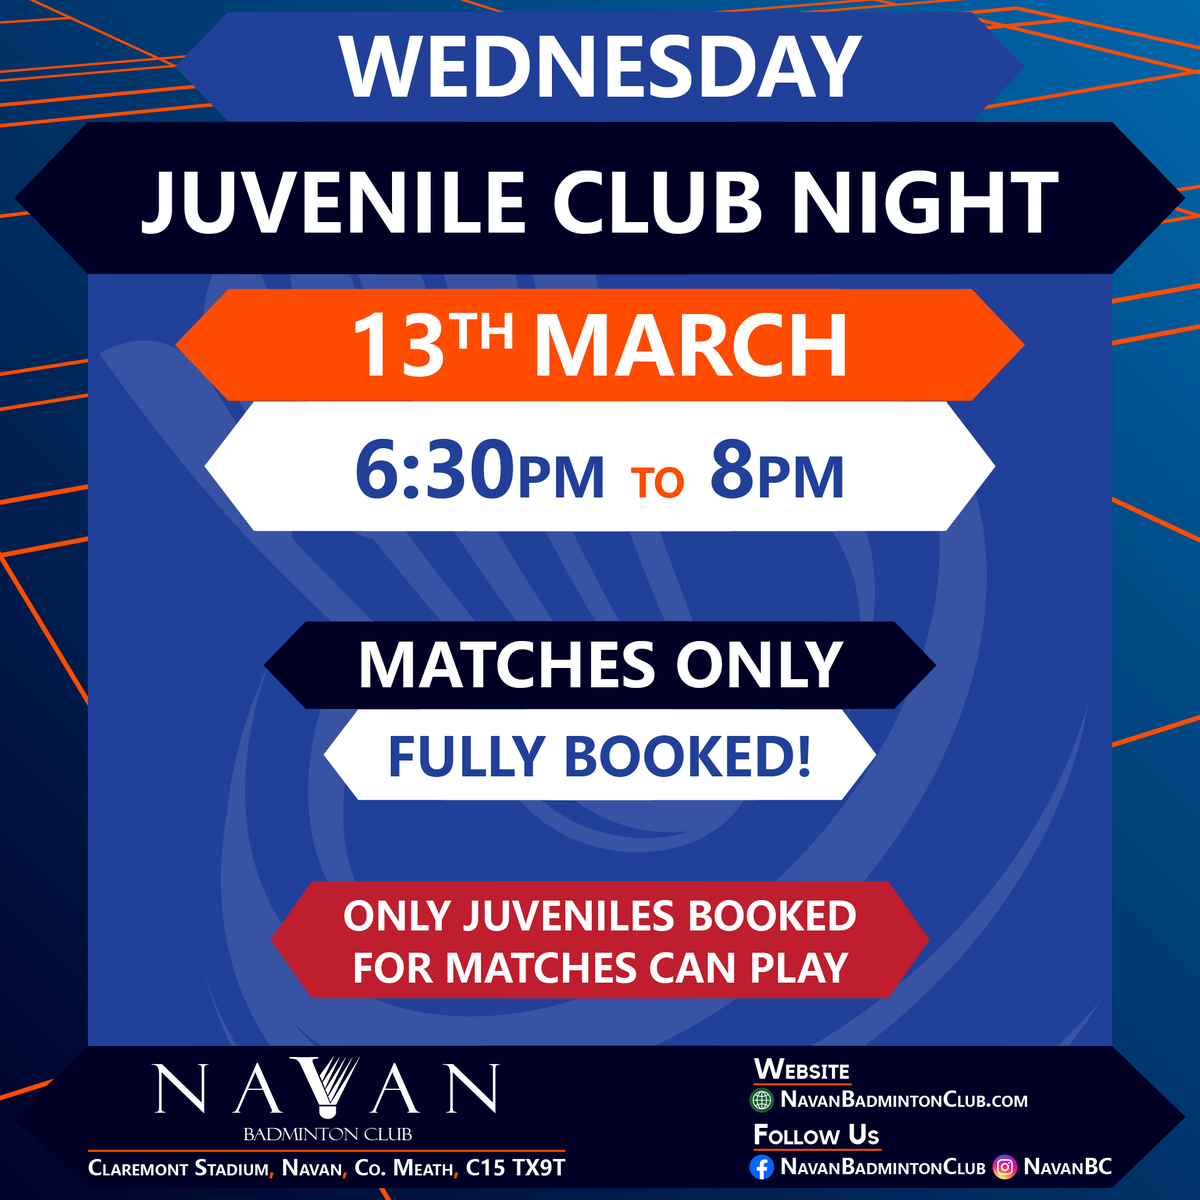 #WEDNESDAY #ClubNight | 13th Mar | 6.30pm-11pm | #ClaremontStadium #Navan #Meath #Ireland

Saddle up, #buckaroos! It's showtime at the #Badminton #Corral! Let's wrangle wins in a #WildWest-style! Matches Only!

#BWFWorldTour #YAE24 #AllOfBadminton #AllEngland2024 #FrenchOpen2024